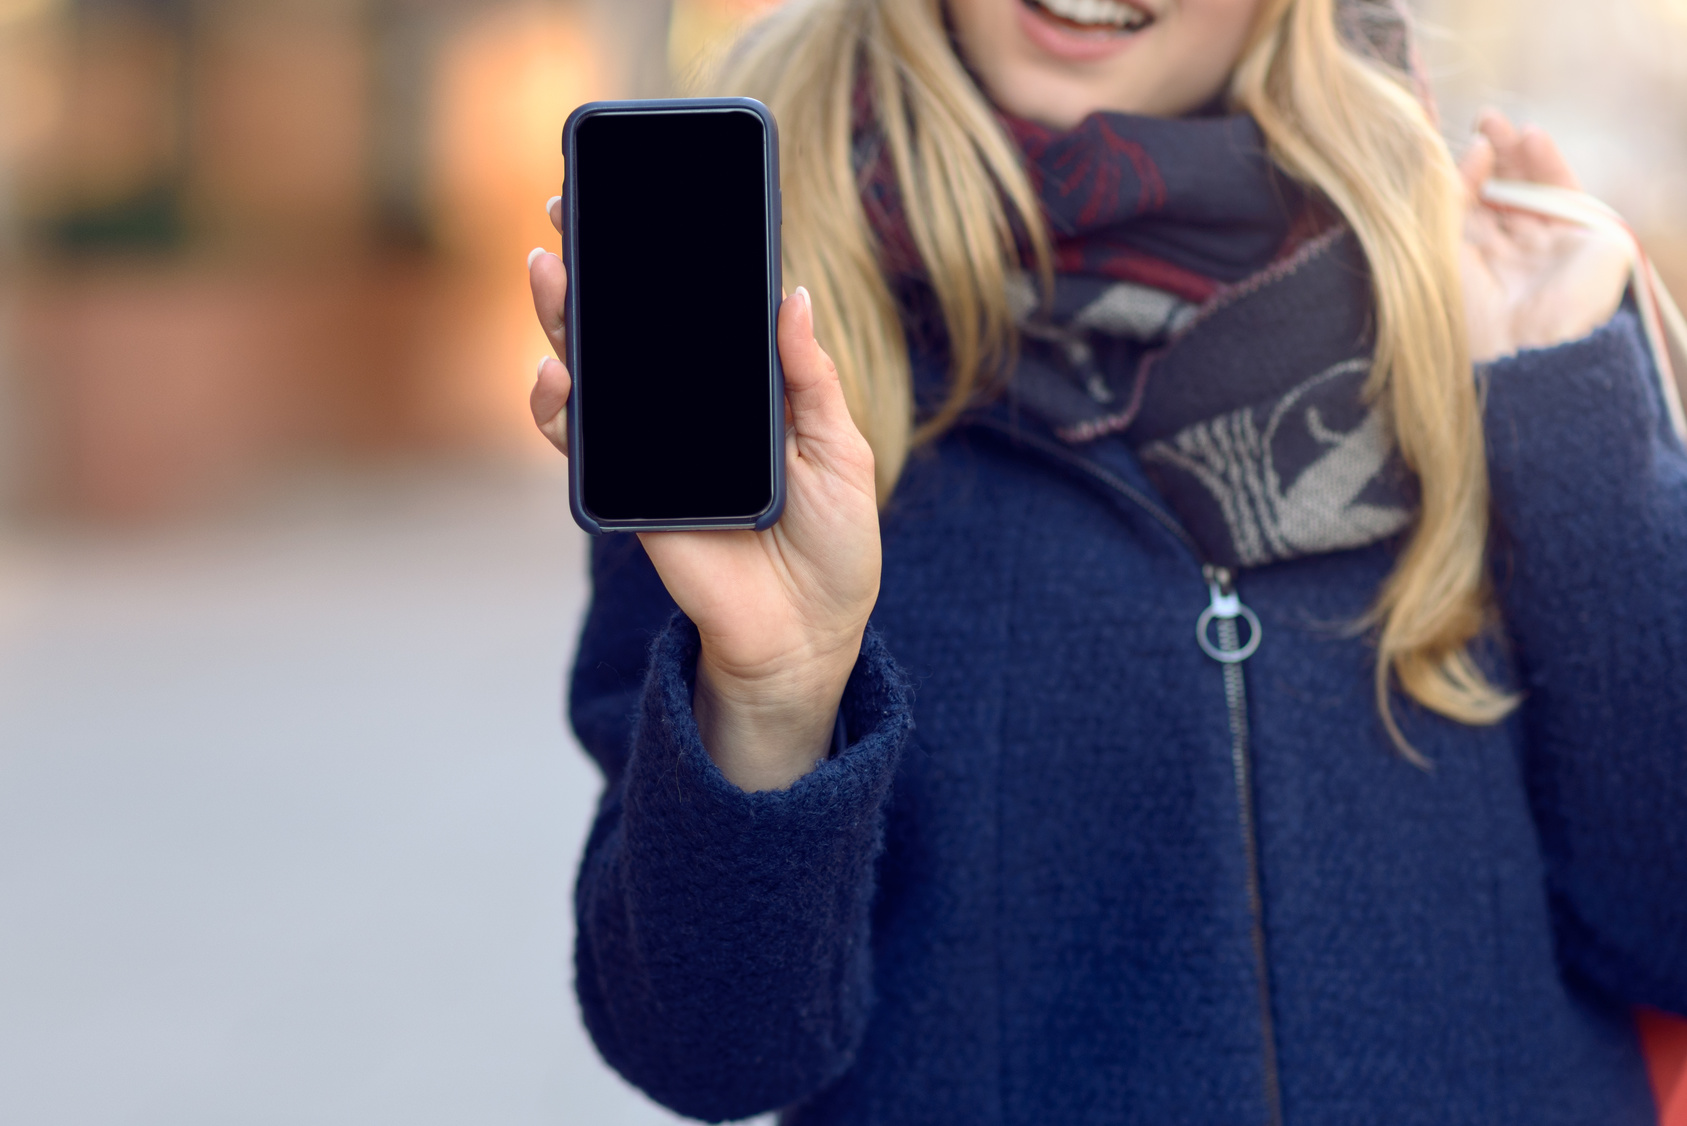 Pretty young woman holding up her mobile phone with a blank display as she stands on an urban street in winter warmly dressed in a knitted woollen scarf, hat and jacket